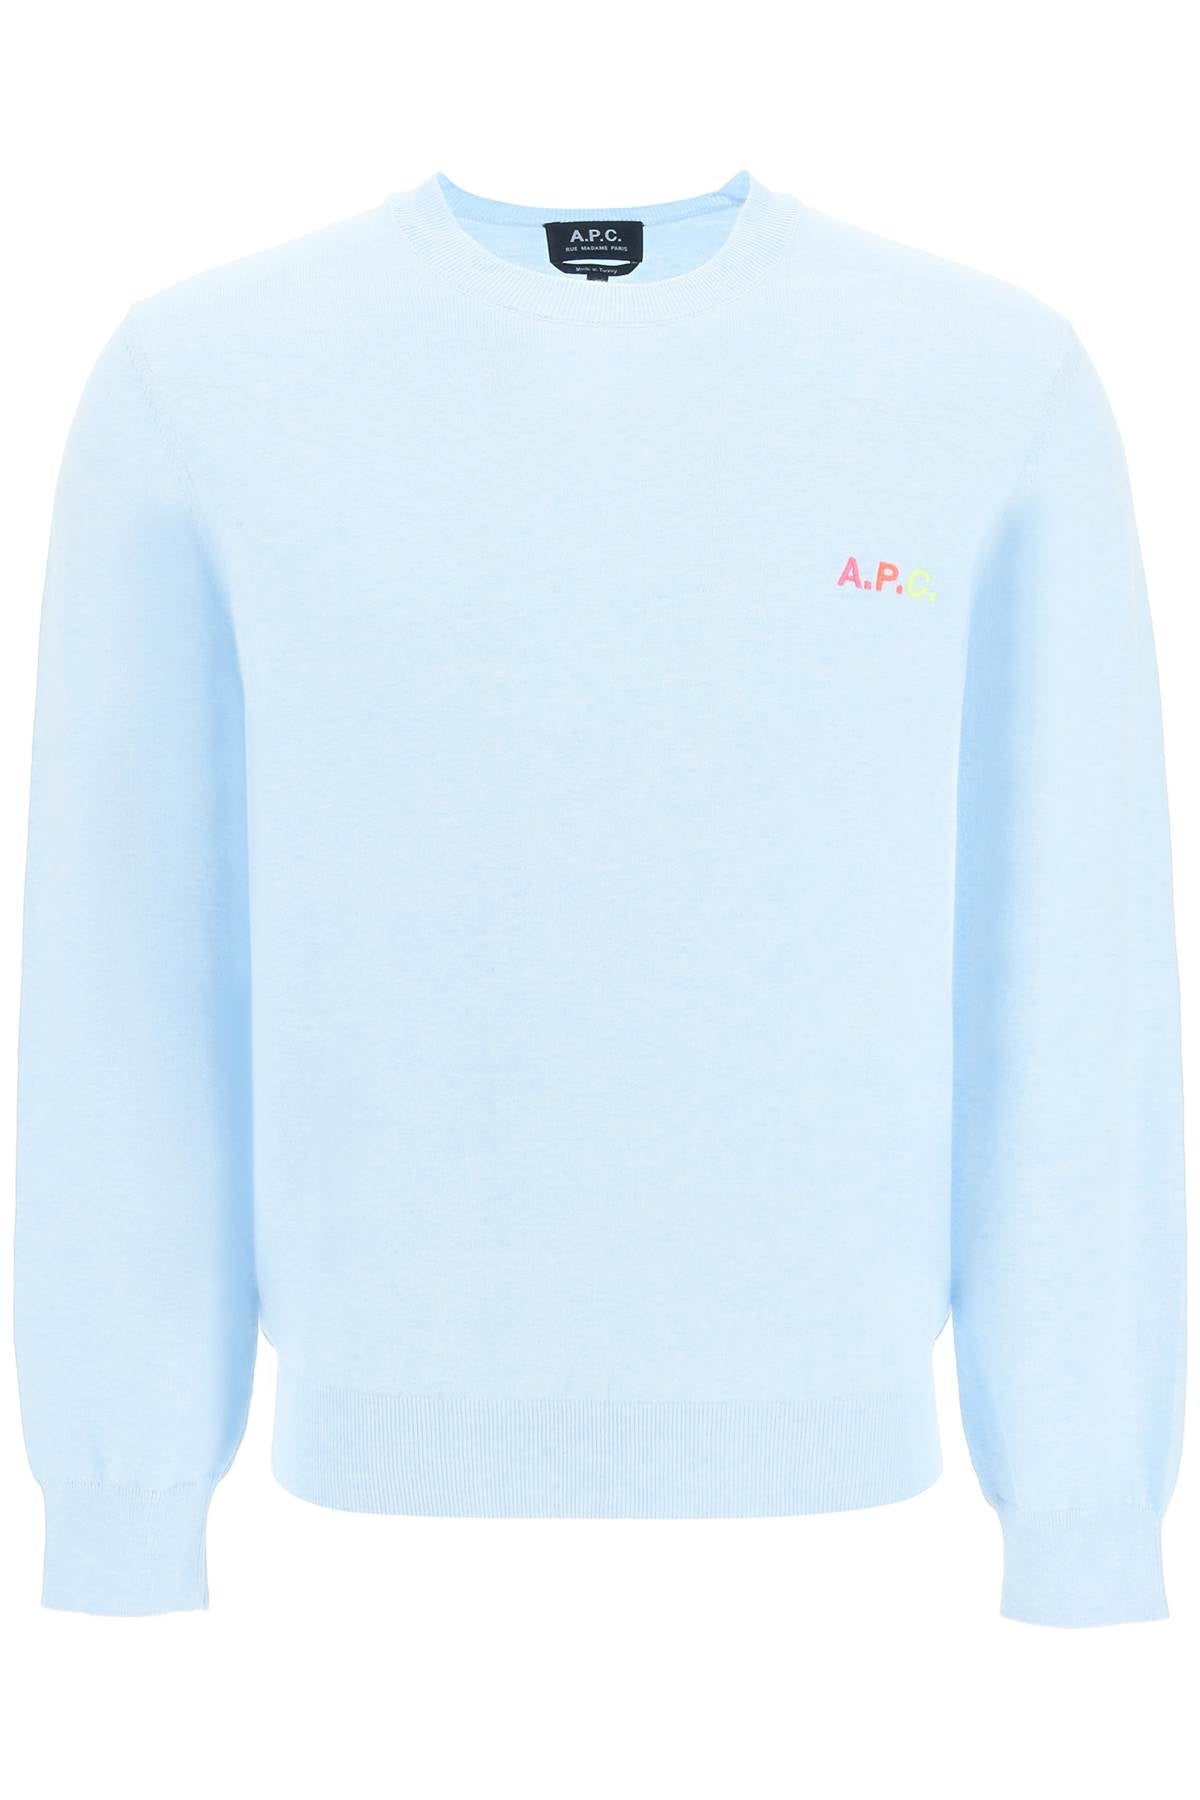 A.p.c. 'martin' pullover with logo embroidery detail - Light blue-clothing-A.P.C.-l-Urbanheer